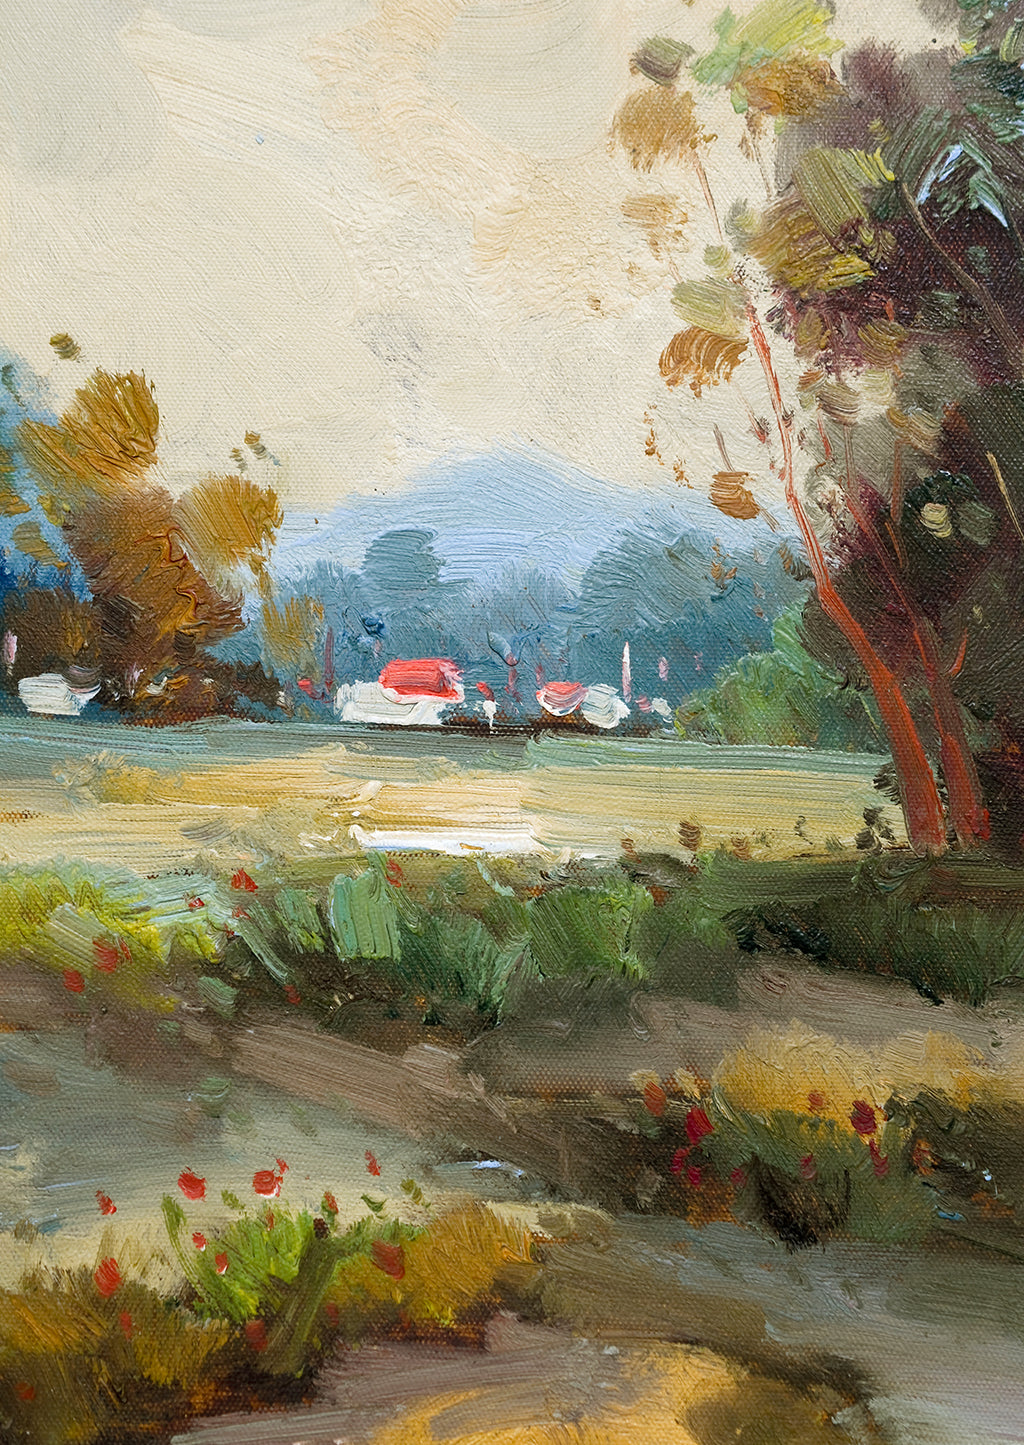 2: A framed landscape oil painting of trees and houses near a creek.